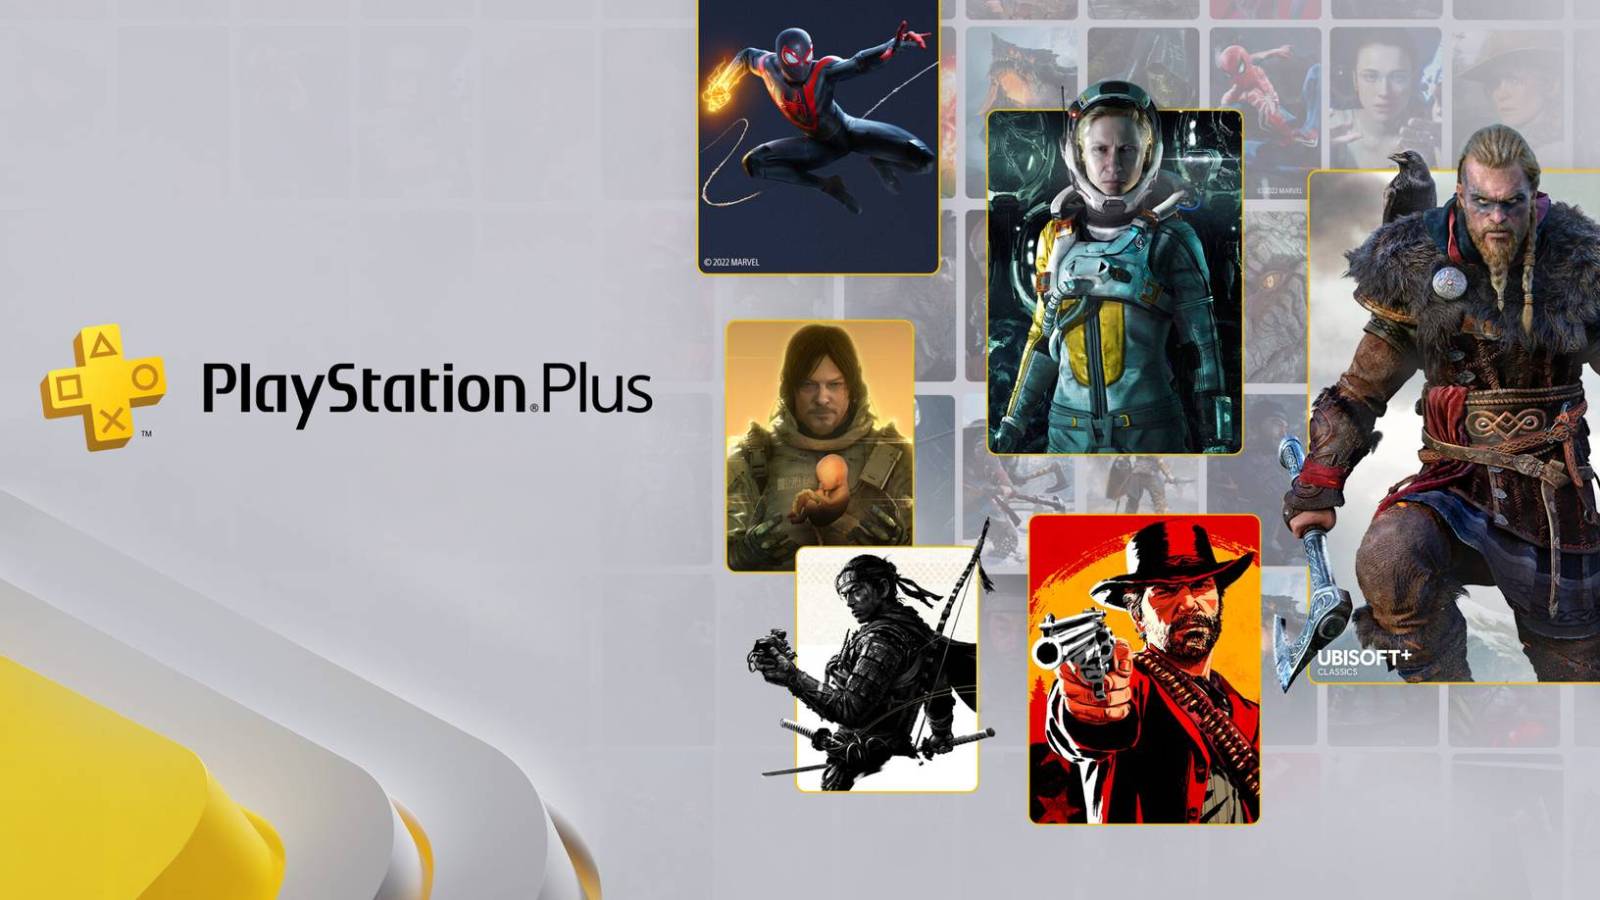 Playstation Plus free limited-time game trials